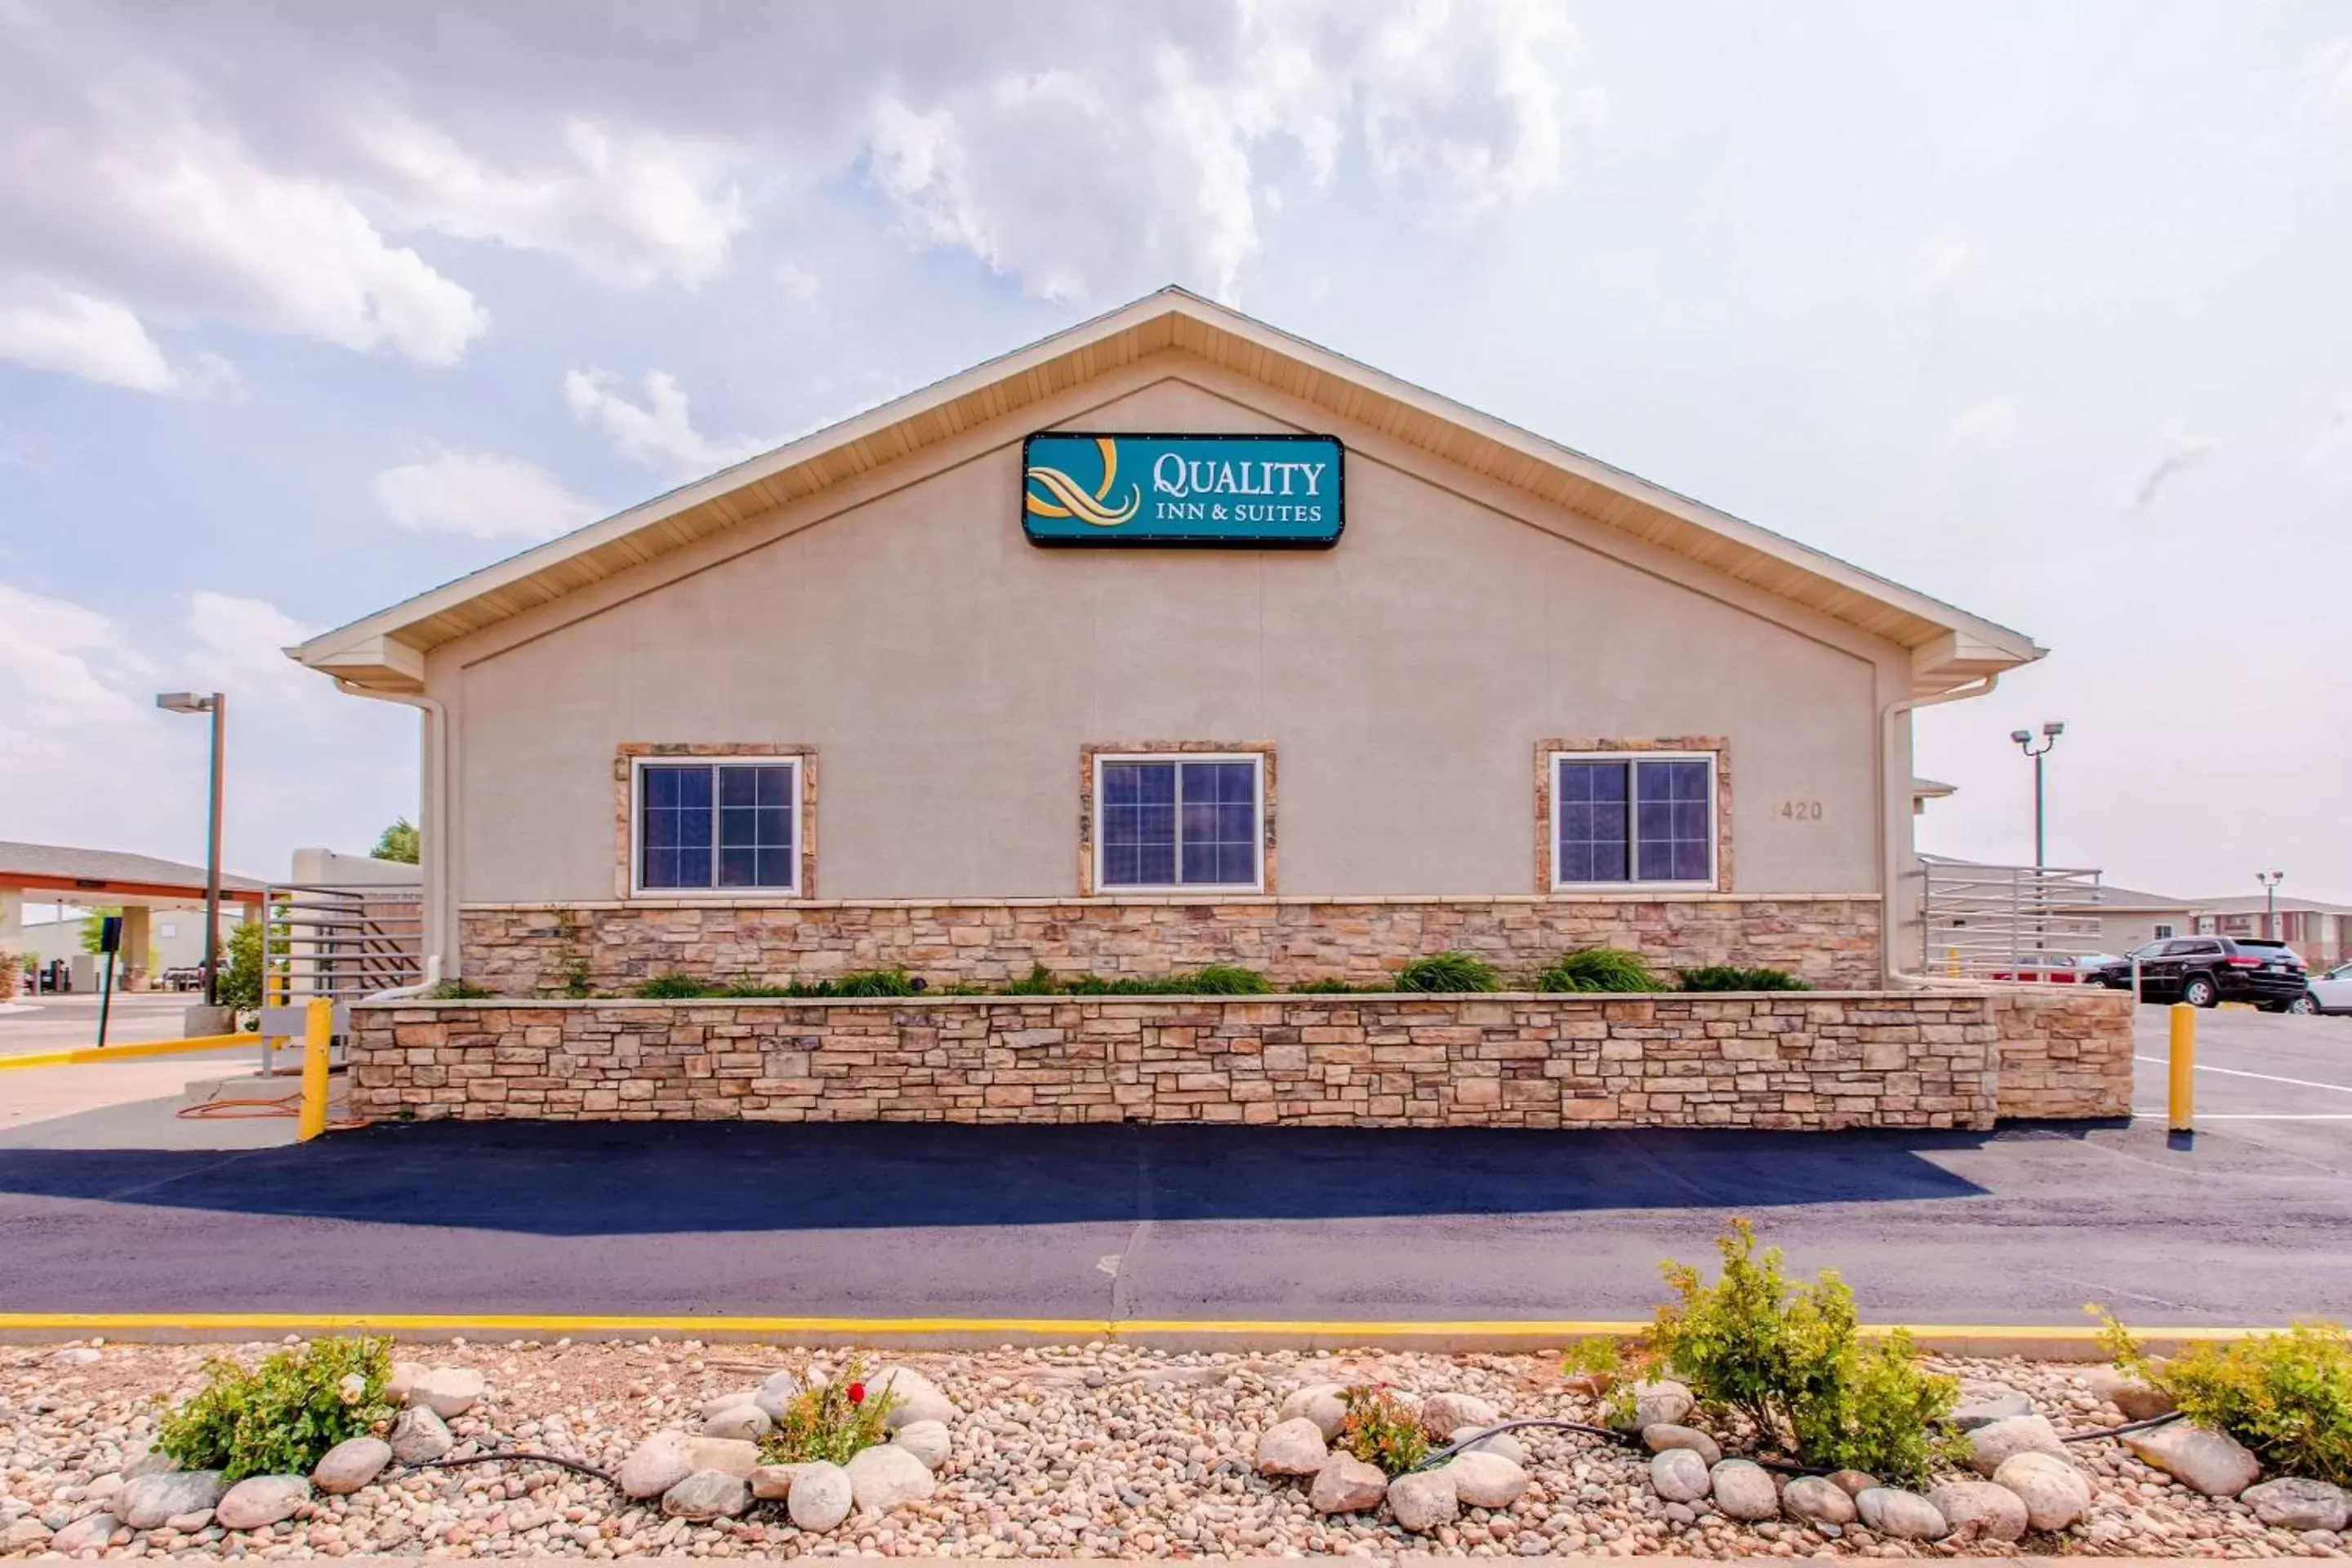 Property Building in Quality Inn & Suites - University